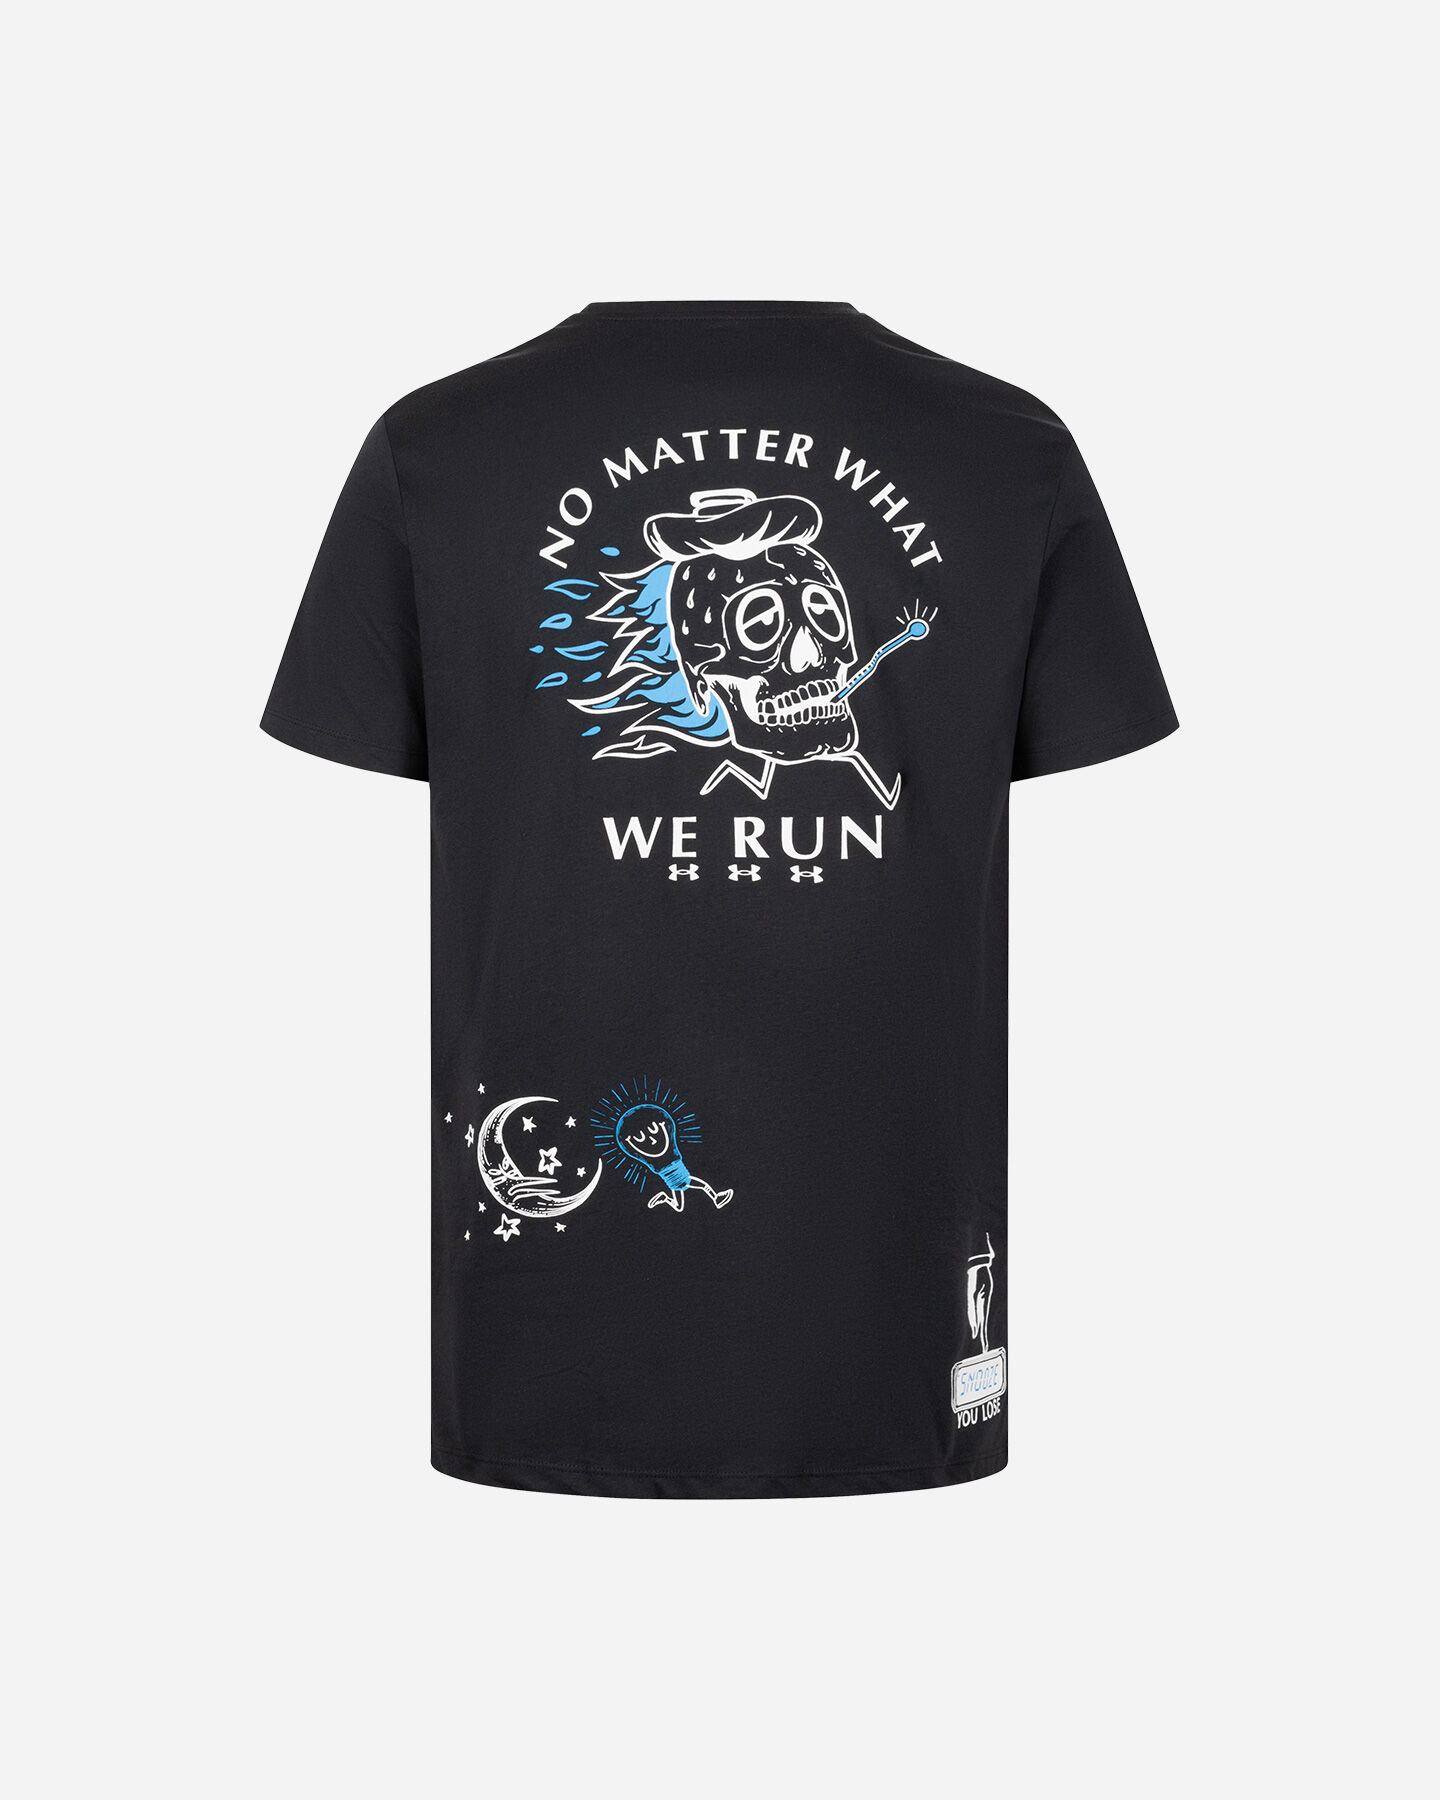  T-Shirt running UNDER ARMOUR WE RUN M S5641891|0001|SM scatto 1